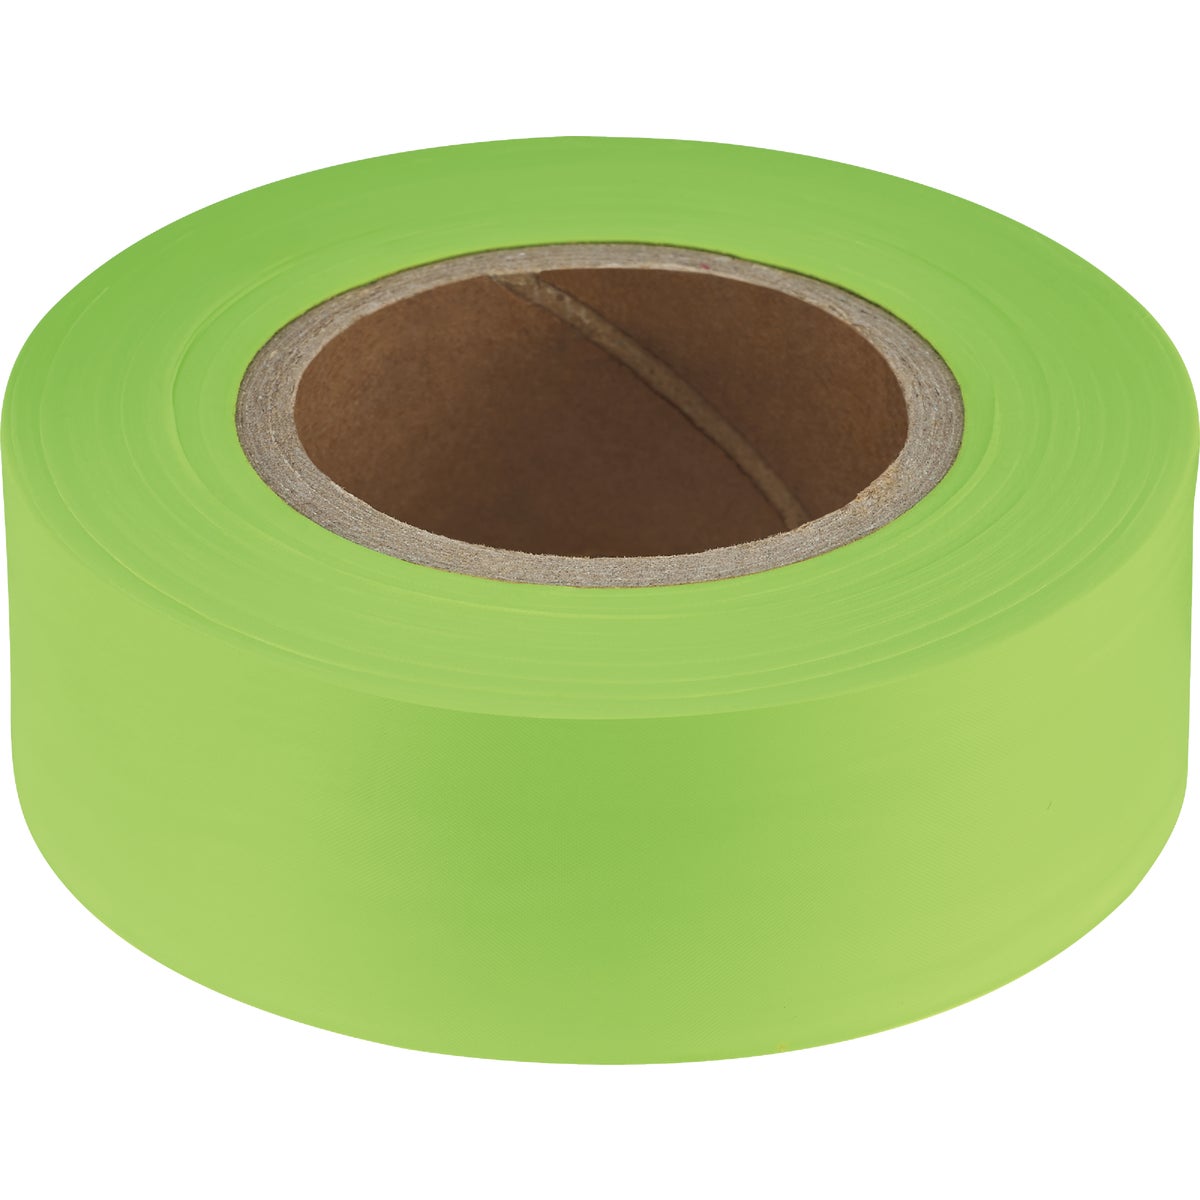 Item 303049, Flagging tape available in a variety of high visibility fluorescent colors